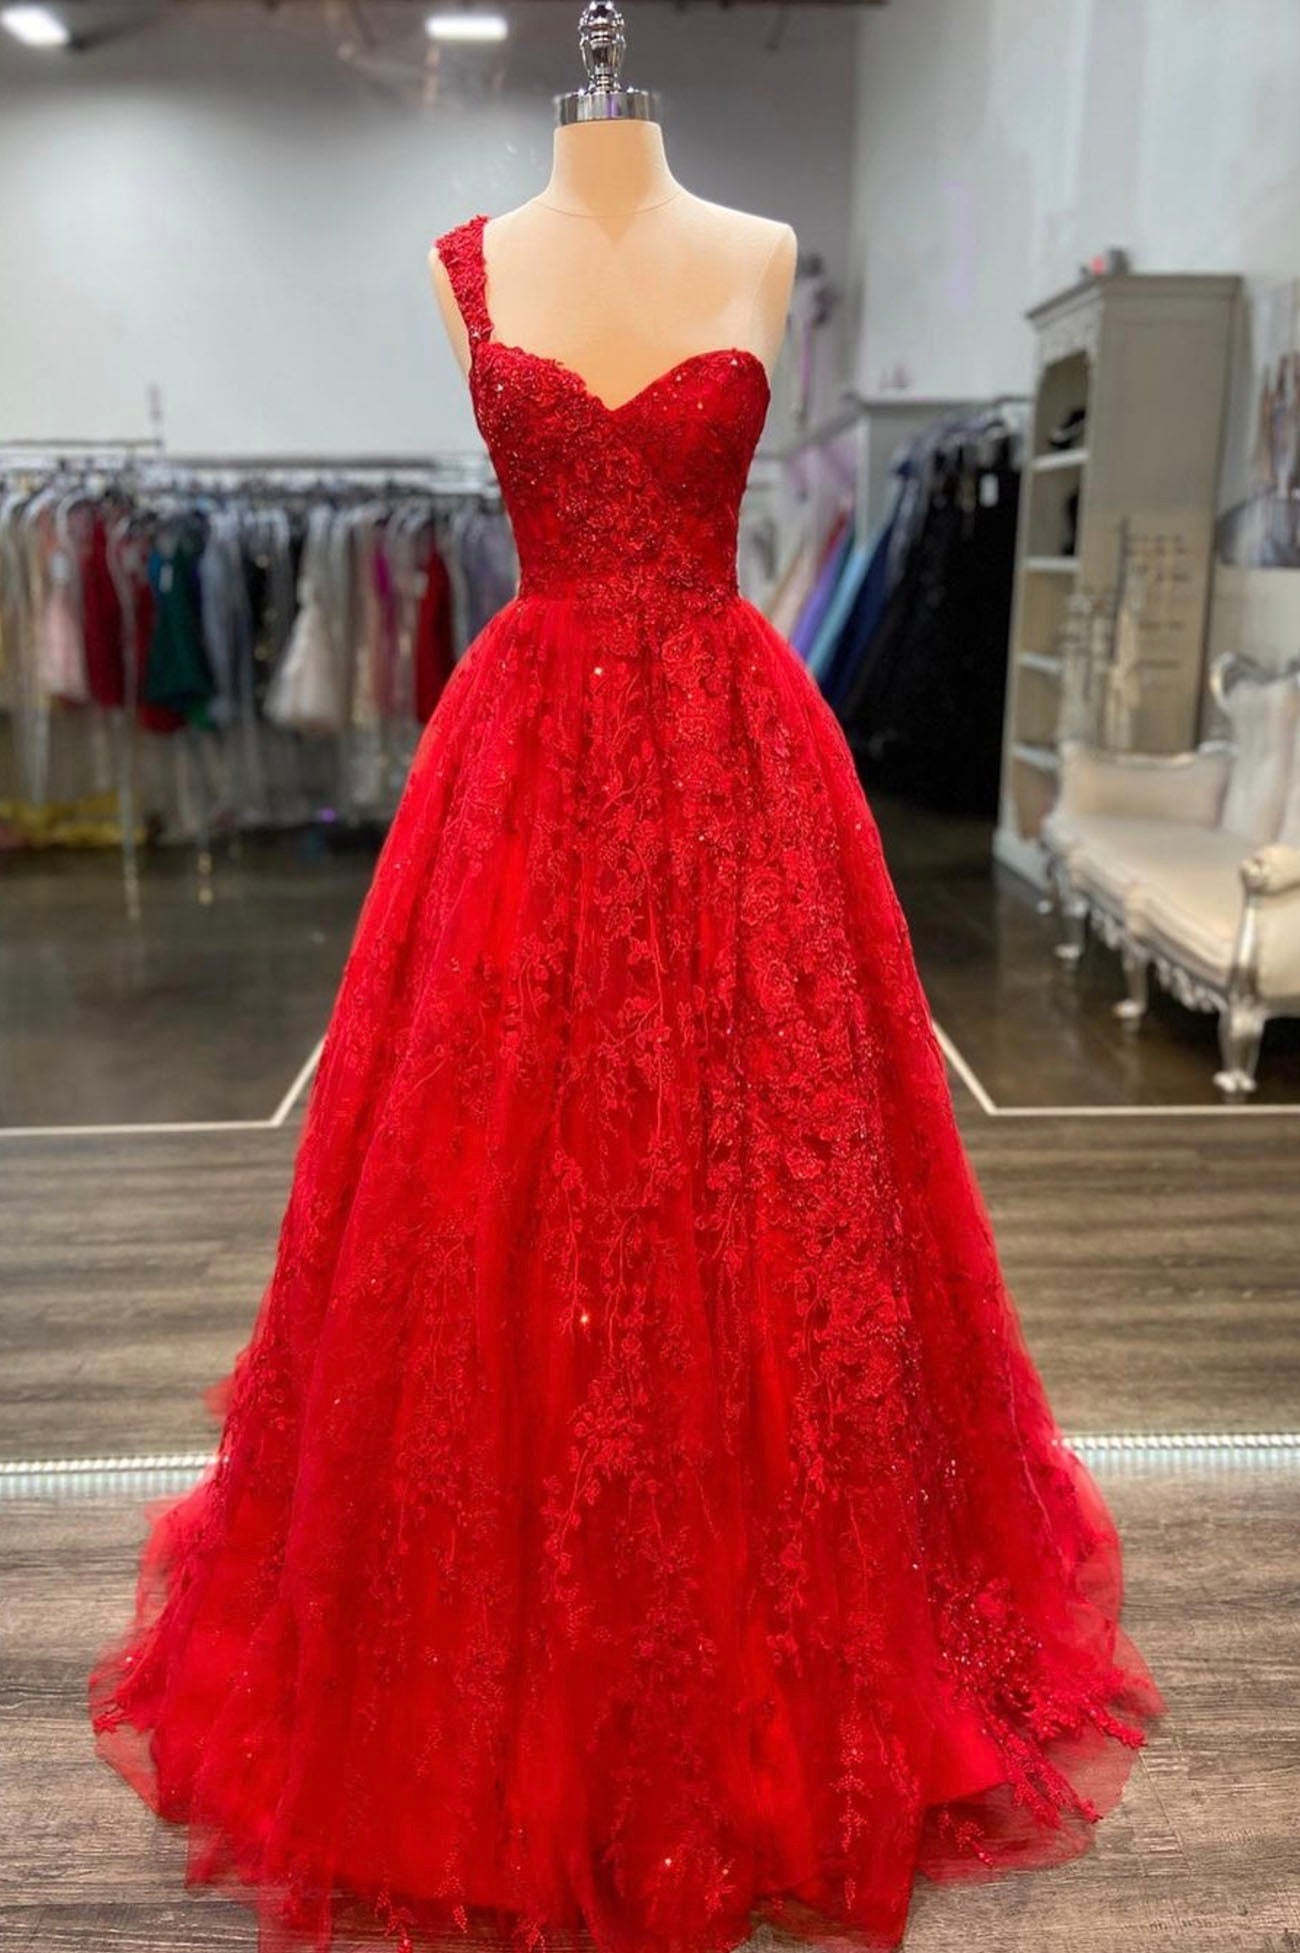 Bridesmaids Dress Styles, Red Lace Long A-Line Prom Dress, One Shoulder Evening Dress